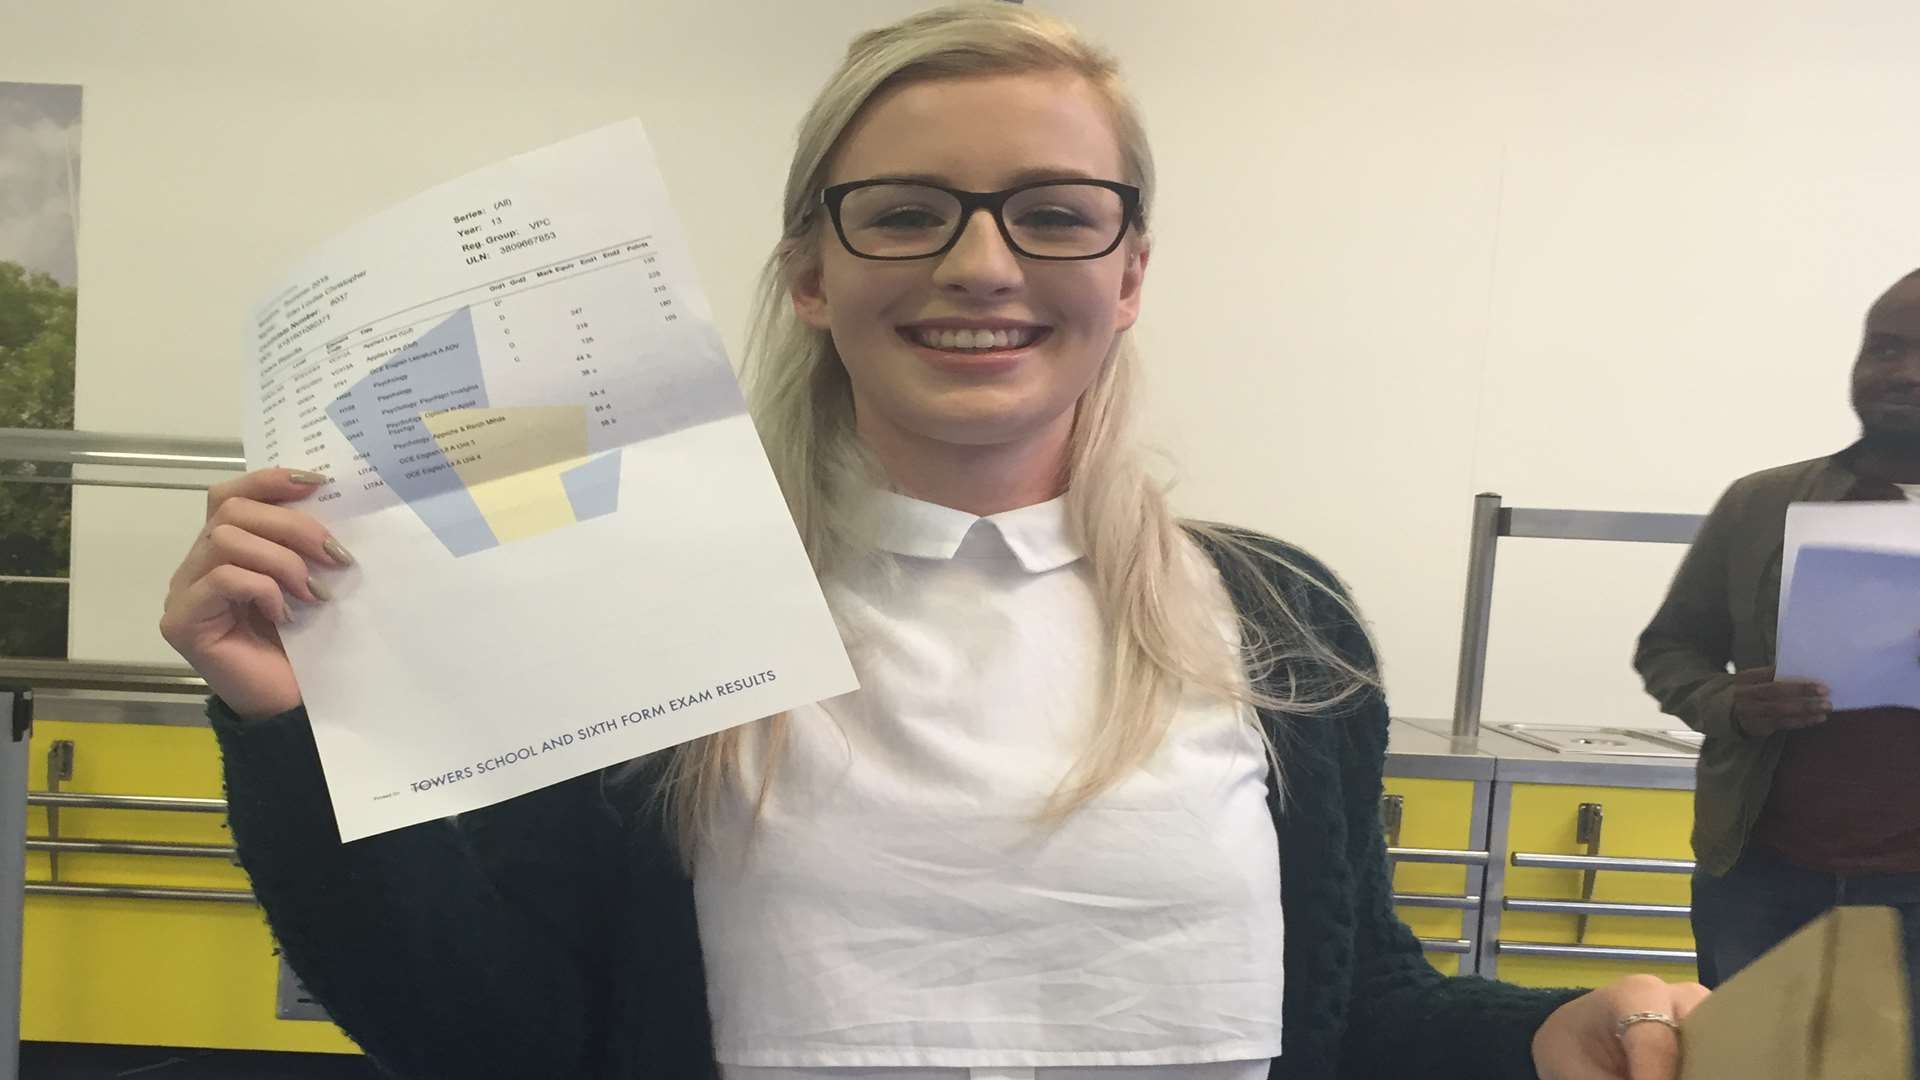 Towers School student Sian Rees is feeling happy